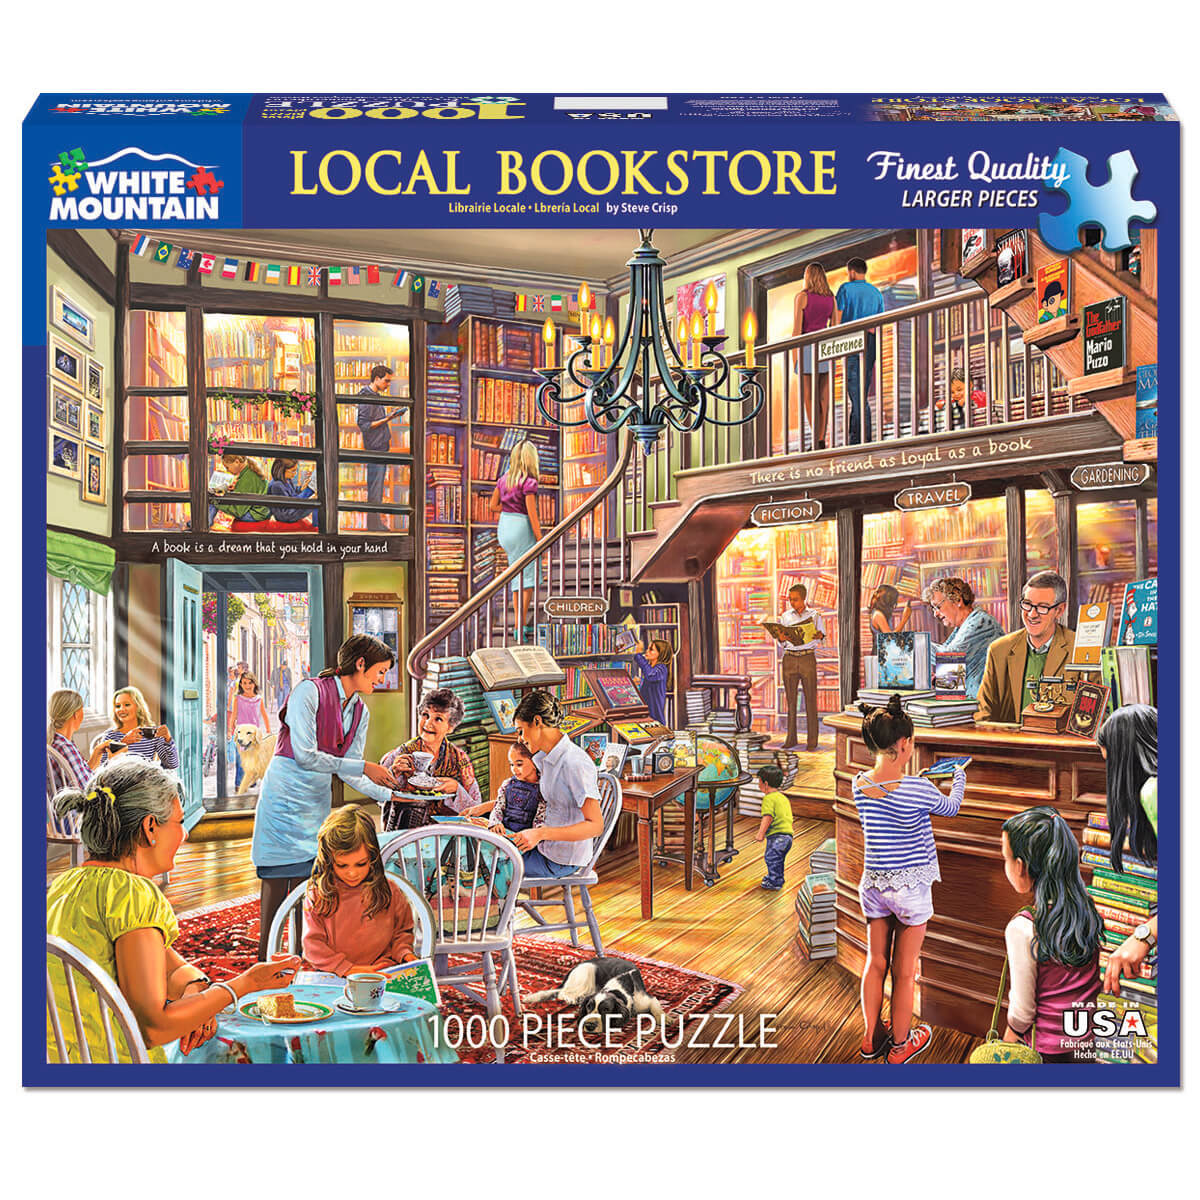 White Mountain Puzzles Local Book Store 1000 Piece Jigsaw Puzzle